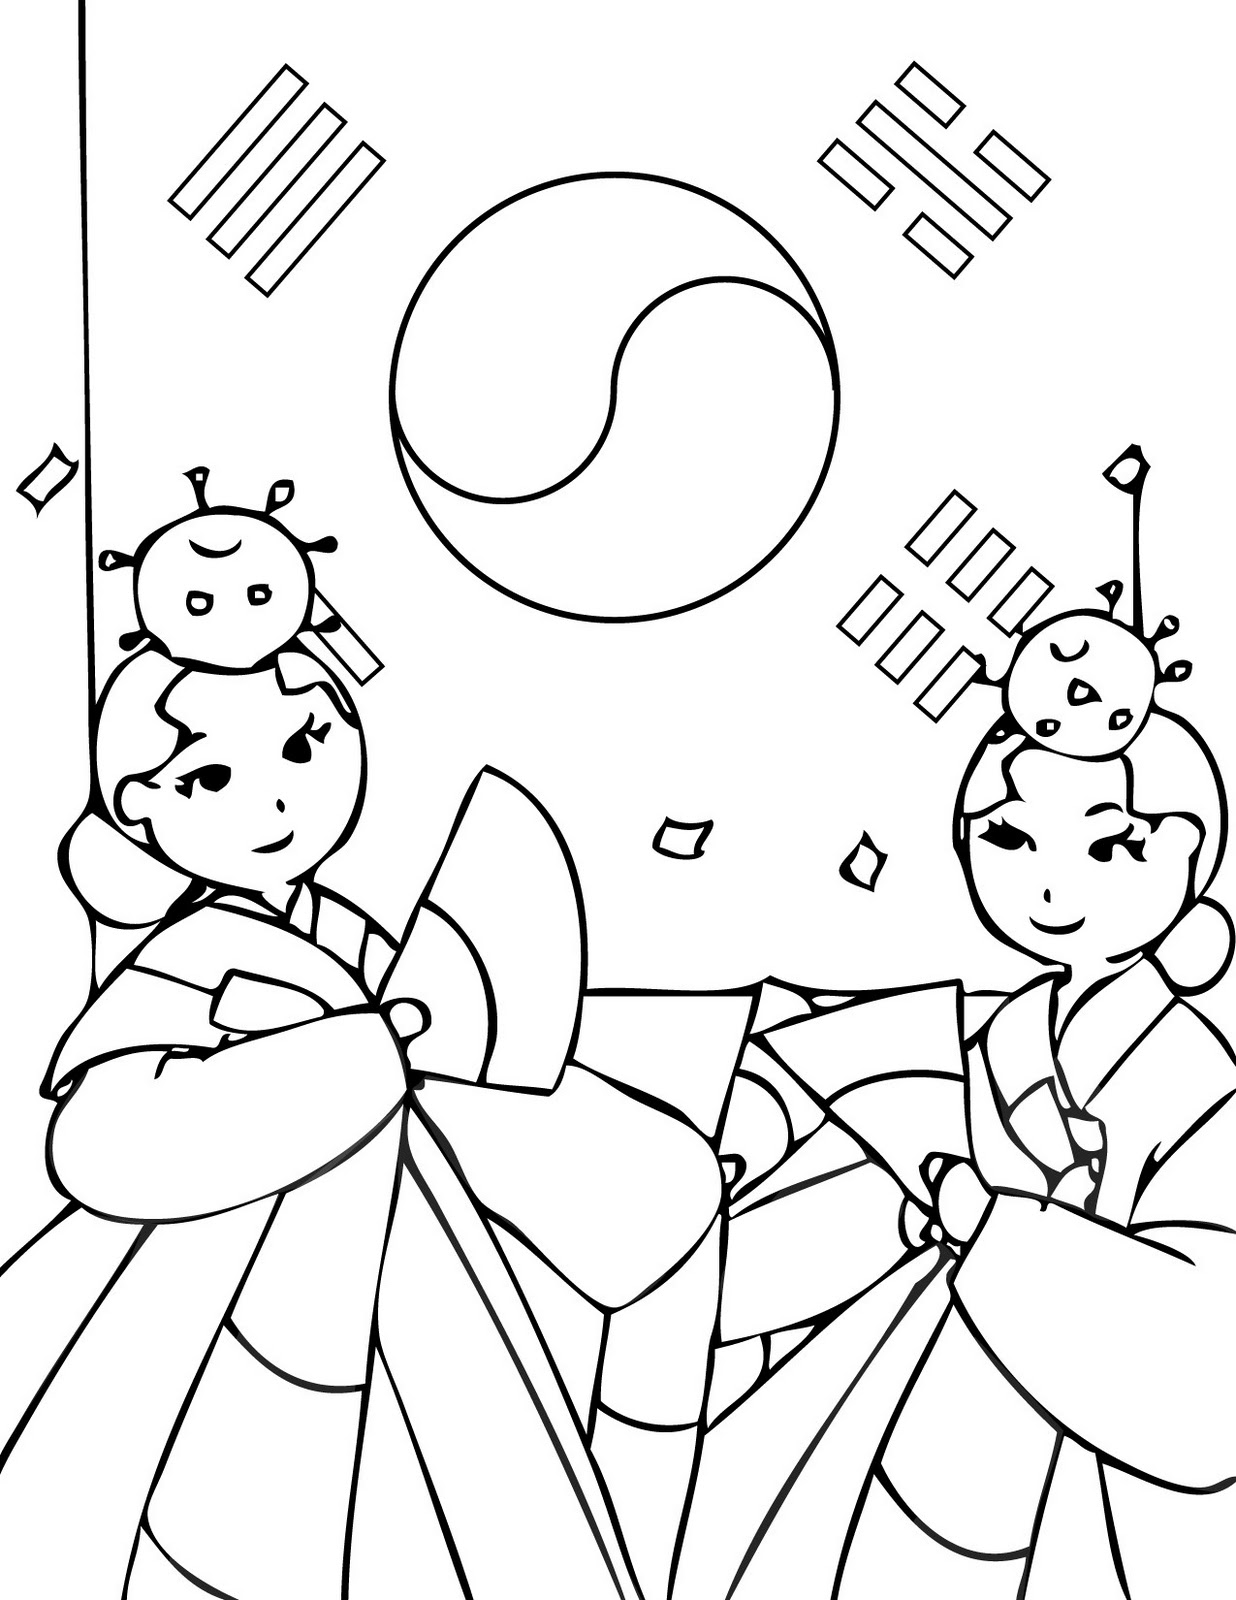 Just Wedeminute: Stats page and Korean coloring pages